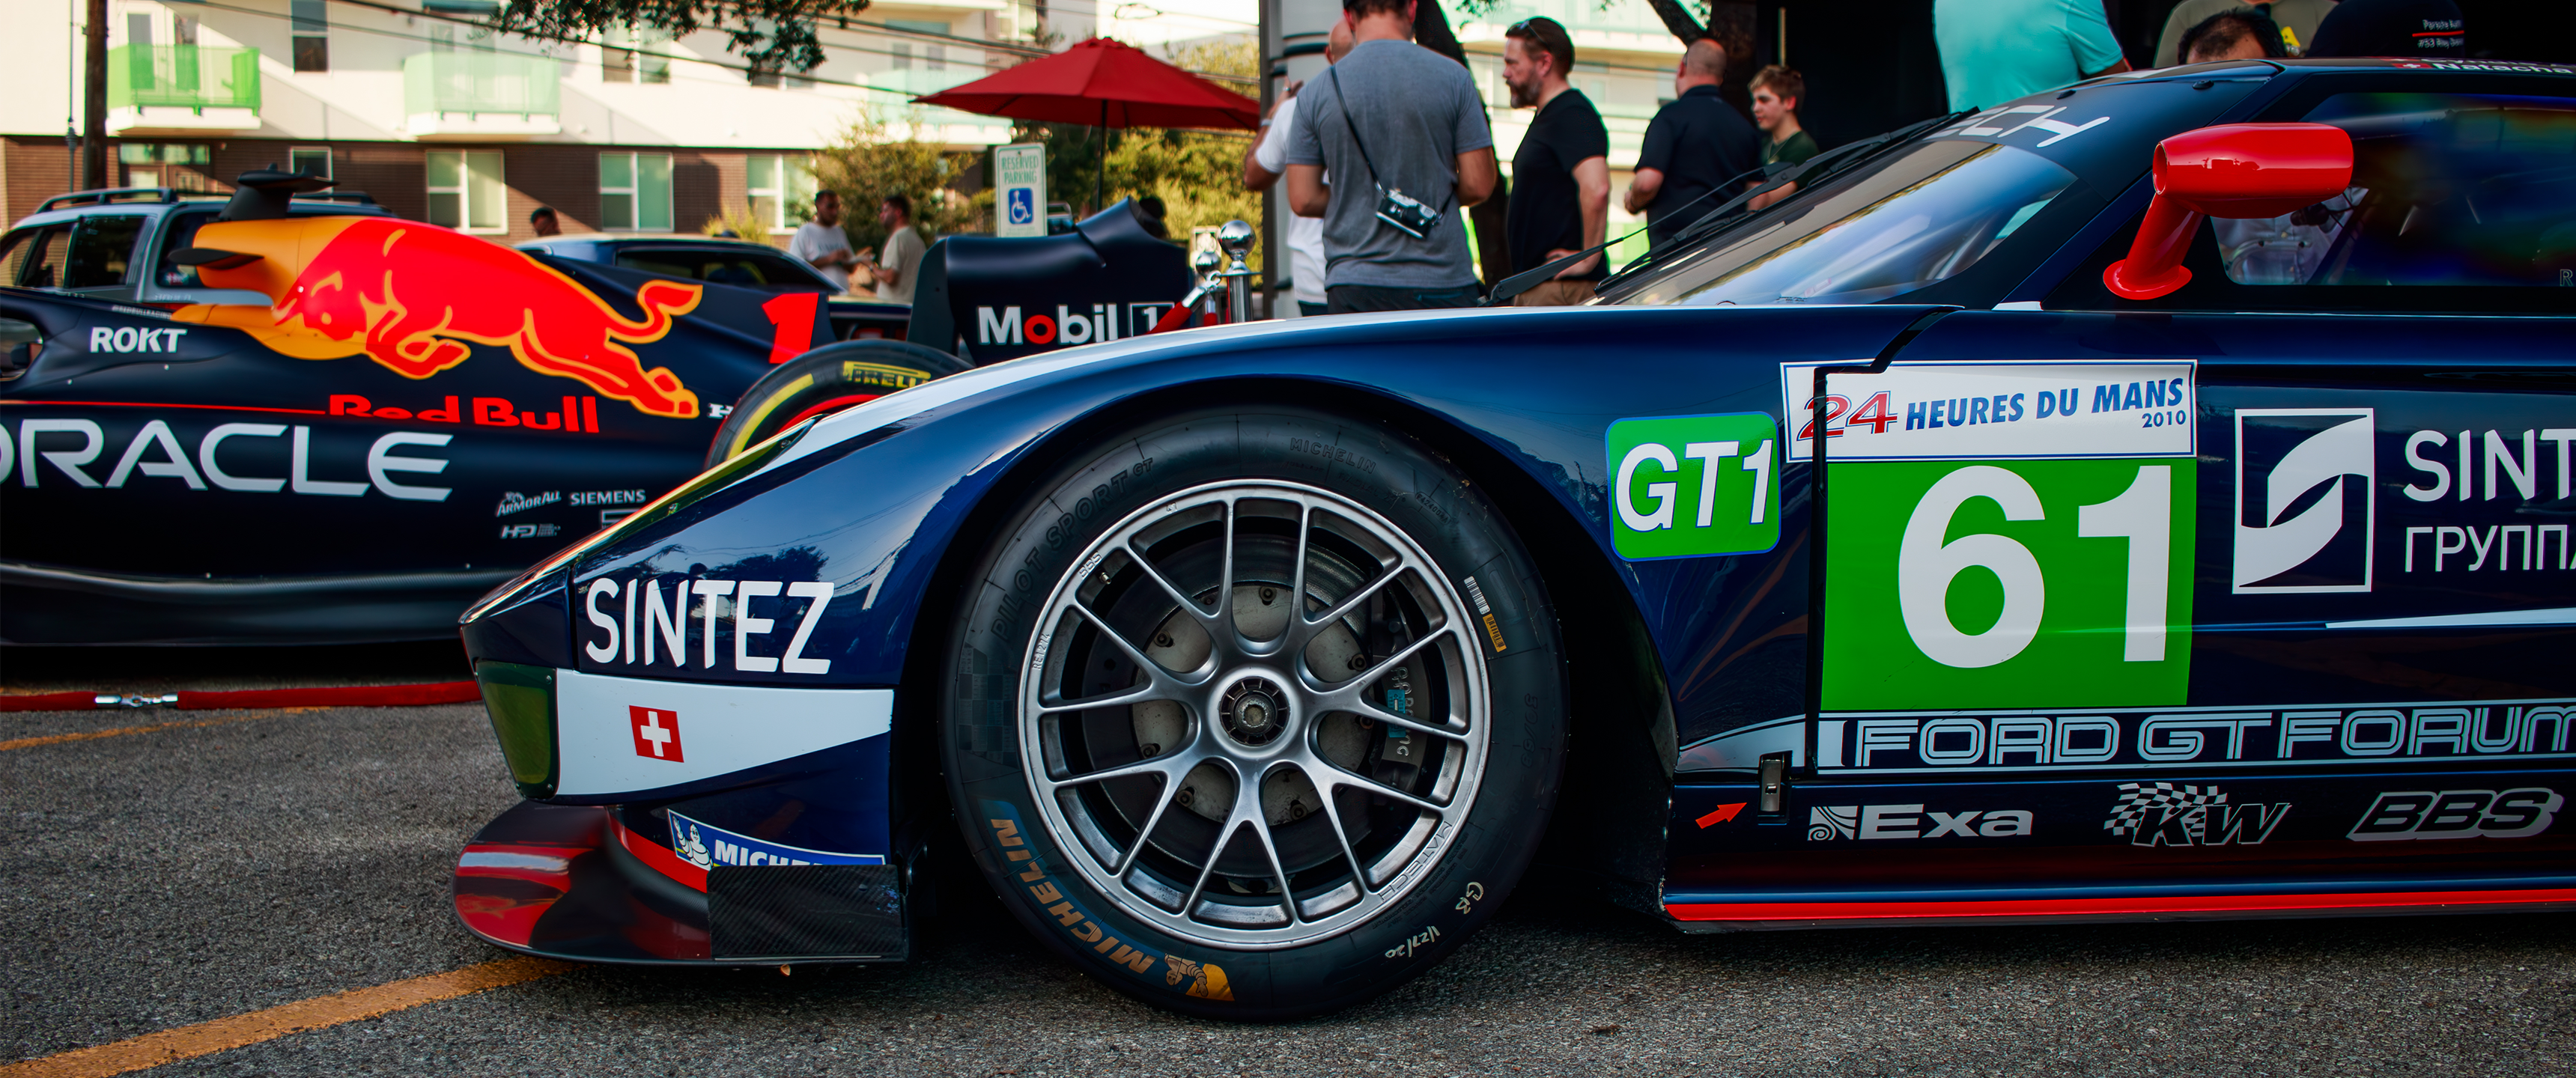 General 3440x1440 race cars Ford GT Ford Le Mans car side view people logo sports car American cars